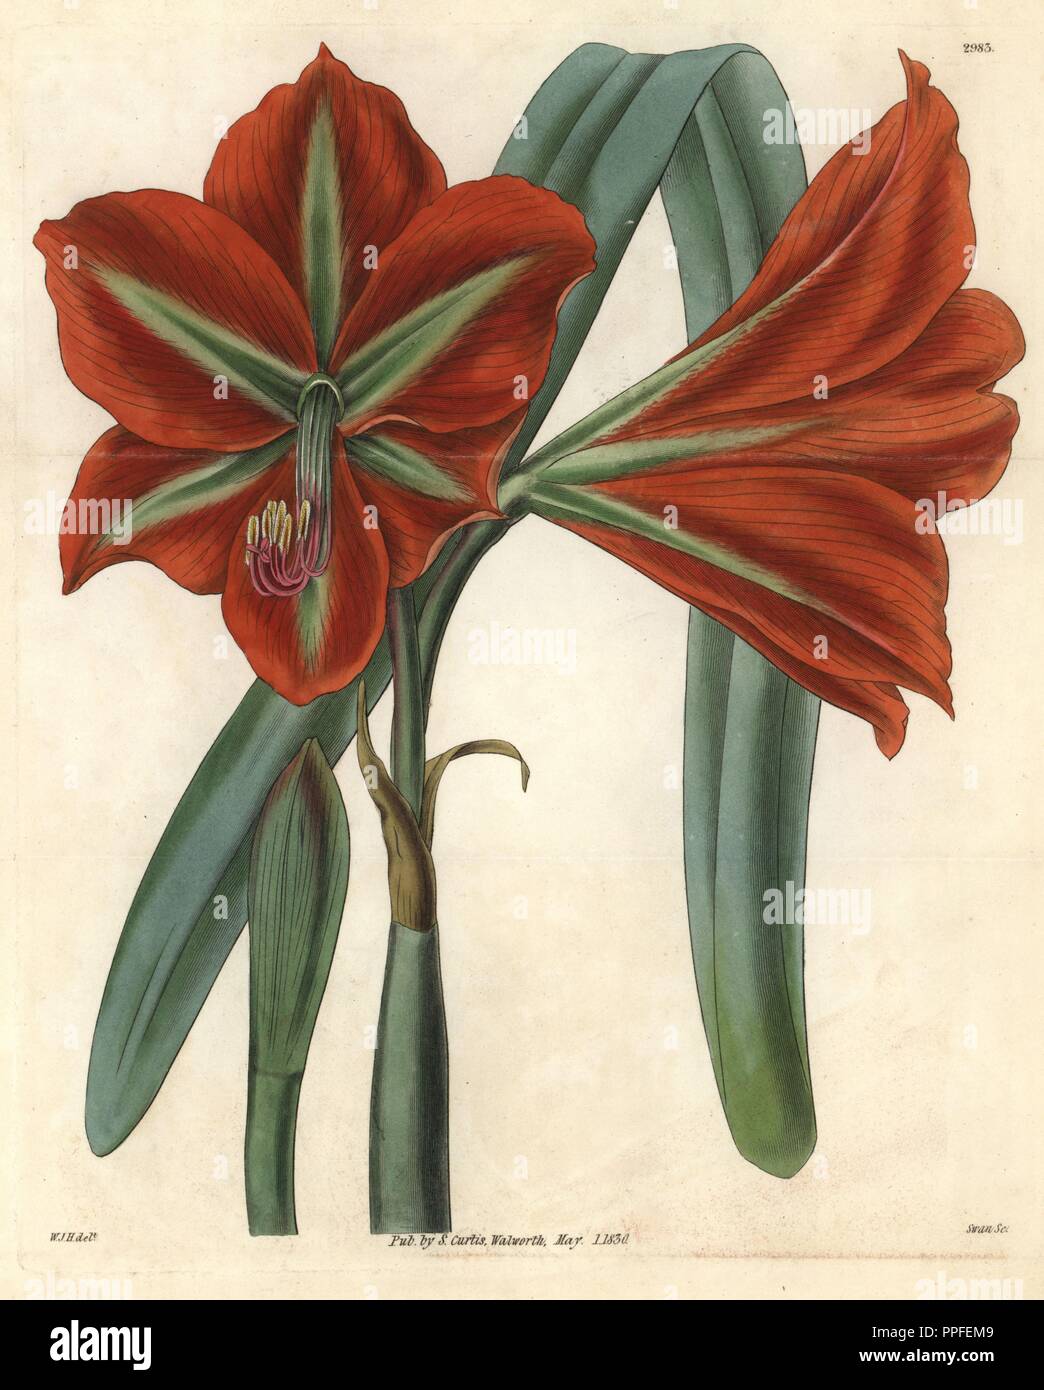 Glaucous-leaved, broad-petaled amaryllis, Amaryllis aulica var. platypetala glaucophylla. Illustration drawn by William Jackson Hooker, engraved by Swan. Handcolored copperplate engraving from William Curtis's 'The Botanical Magazine,' Samuel Curtis, 1830. Hooker (1785-1865) was an English botanist, writer and artist. He was Regius Professor of Botany at Glasgow University, and editor of Curtis' 'Botanical Magazine' from 1827 to 1865. In 1841, he was appointed director of the Royal Botanic Gardens at Kew, and was succeeded by his son Joseph Dalton. Hooker documented the fern and orchid crazes  Stock Photo